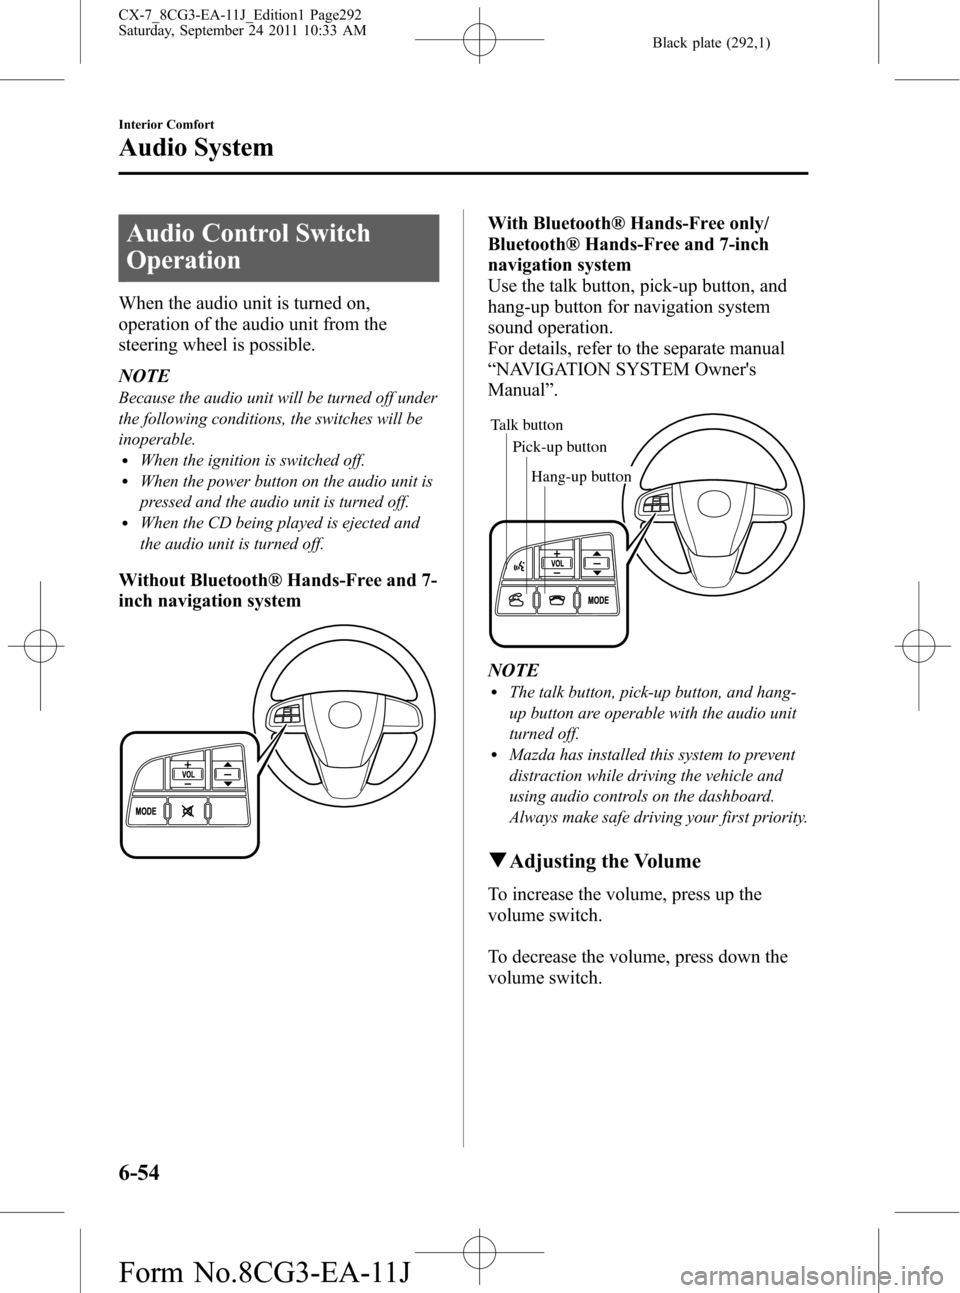 MAZDA MODEL CX-7 2012  Owners Manual (in English) Black plate (292,1)
Audio Control Switch
Operation
When the audio unit is turned on,
operation of the audio unit from the
steering wheel is possible.
NOTE
Because the audio unit will be turned off und